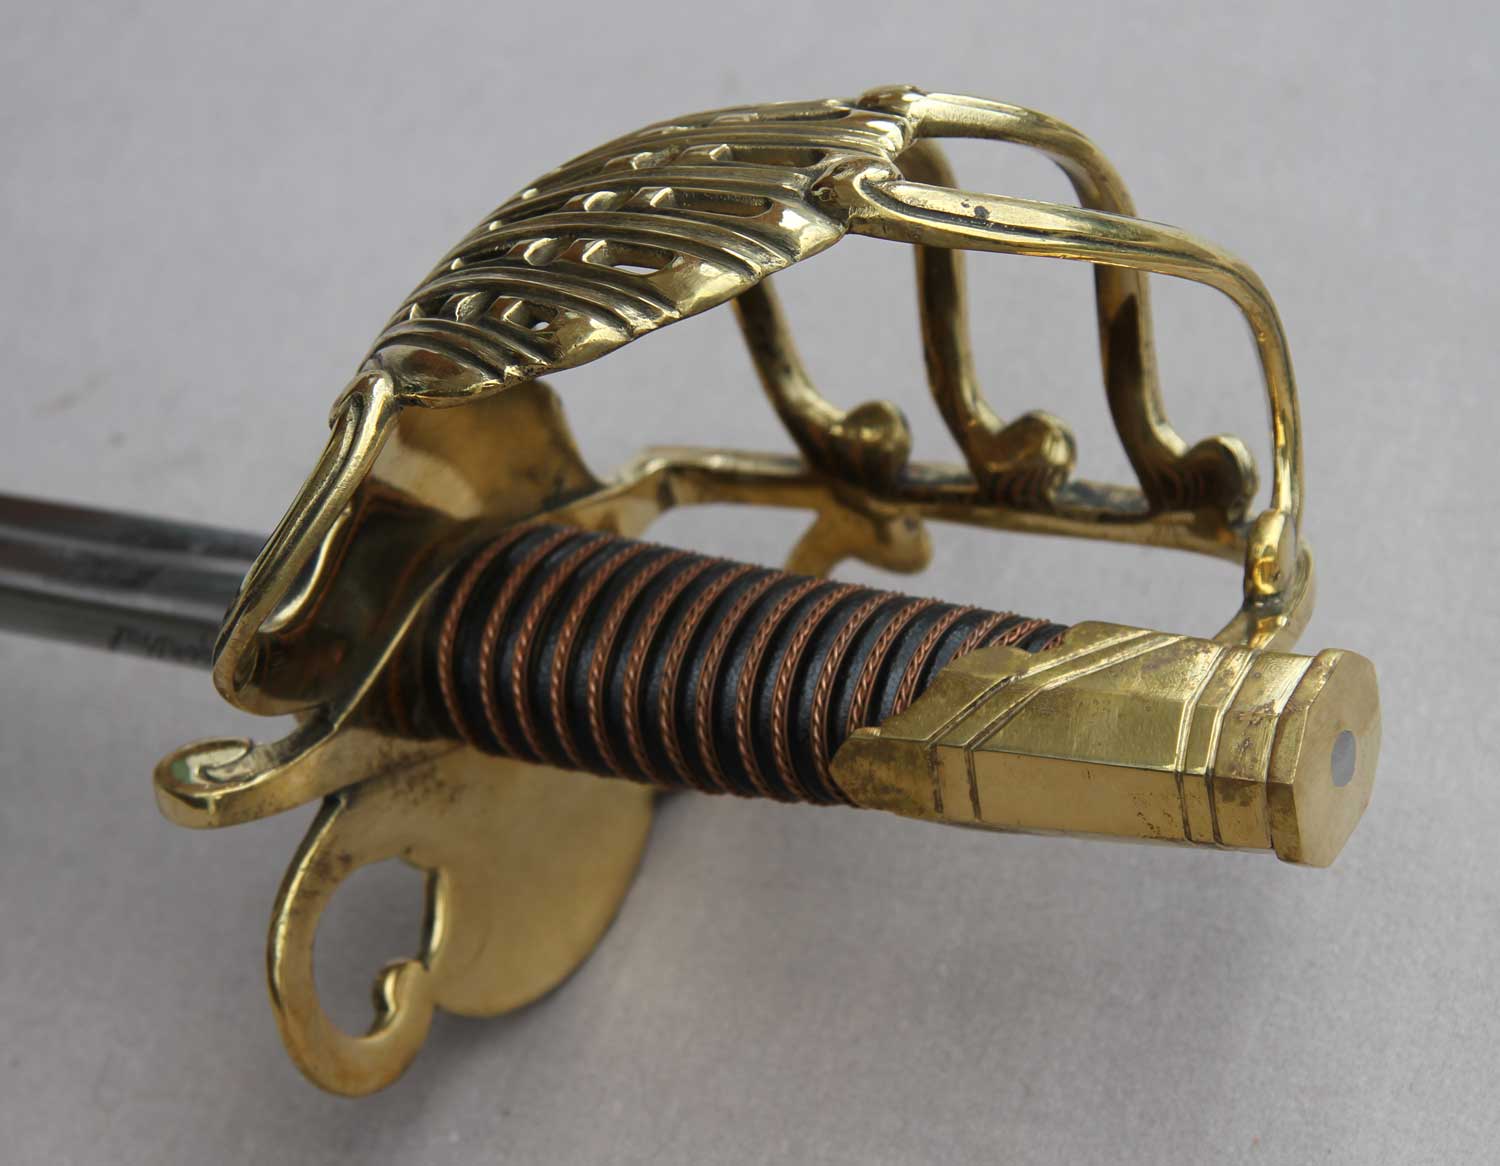 French, Heavy Cavalry Sword - Click Image to Close